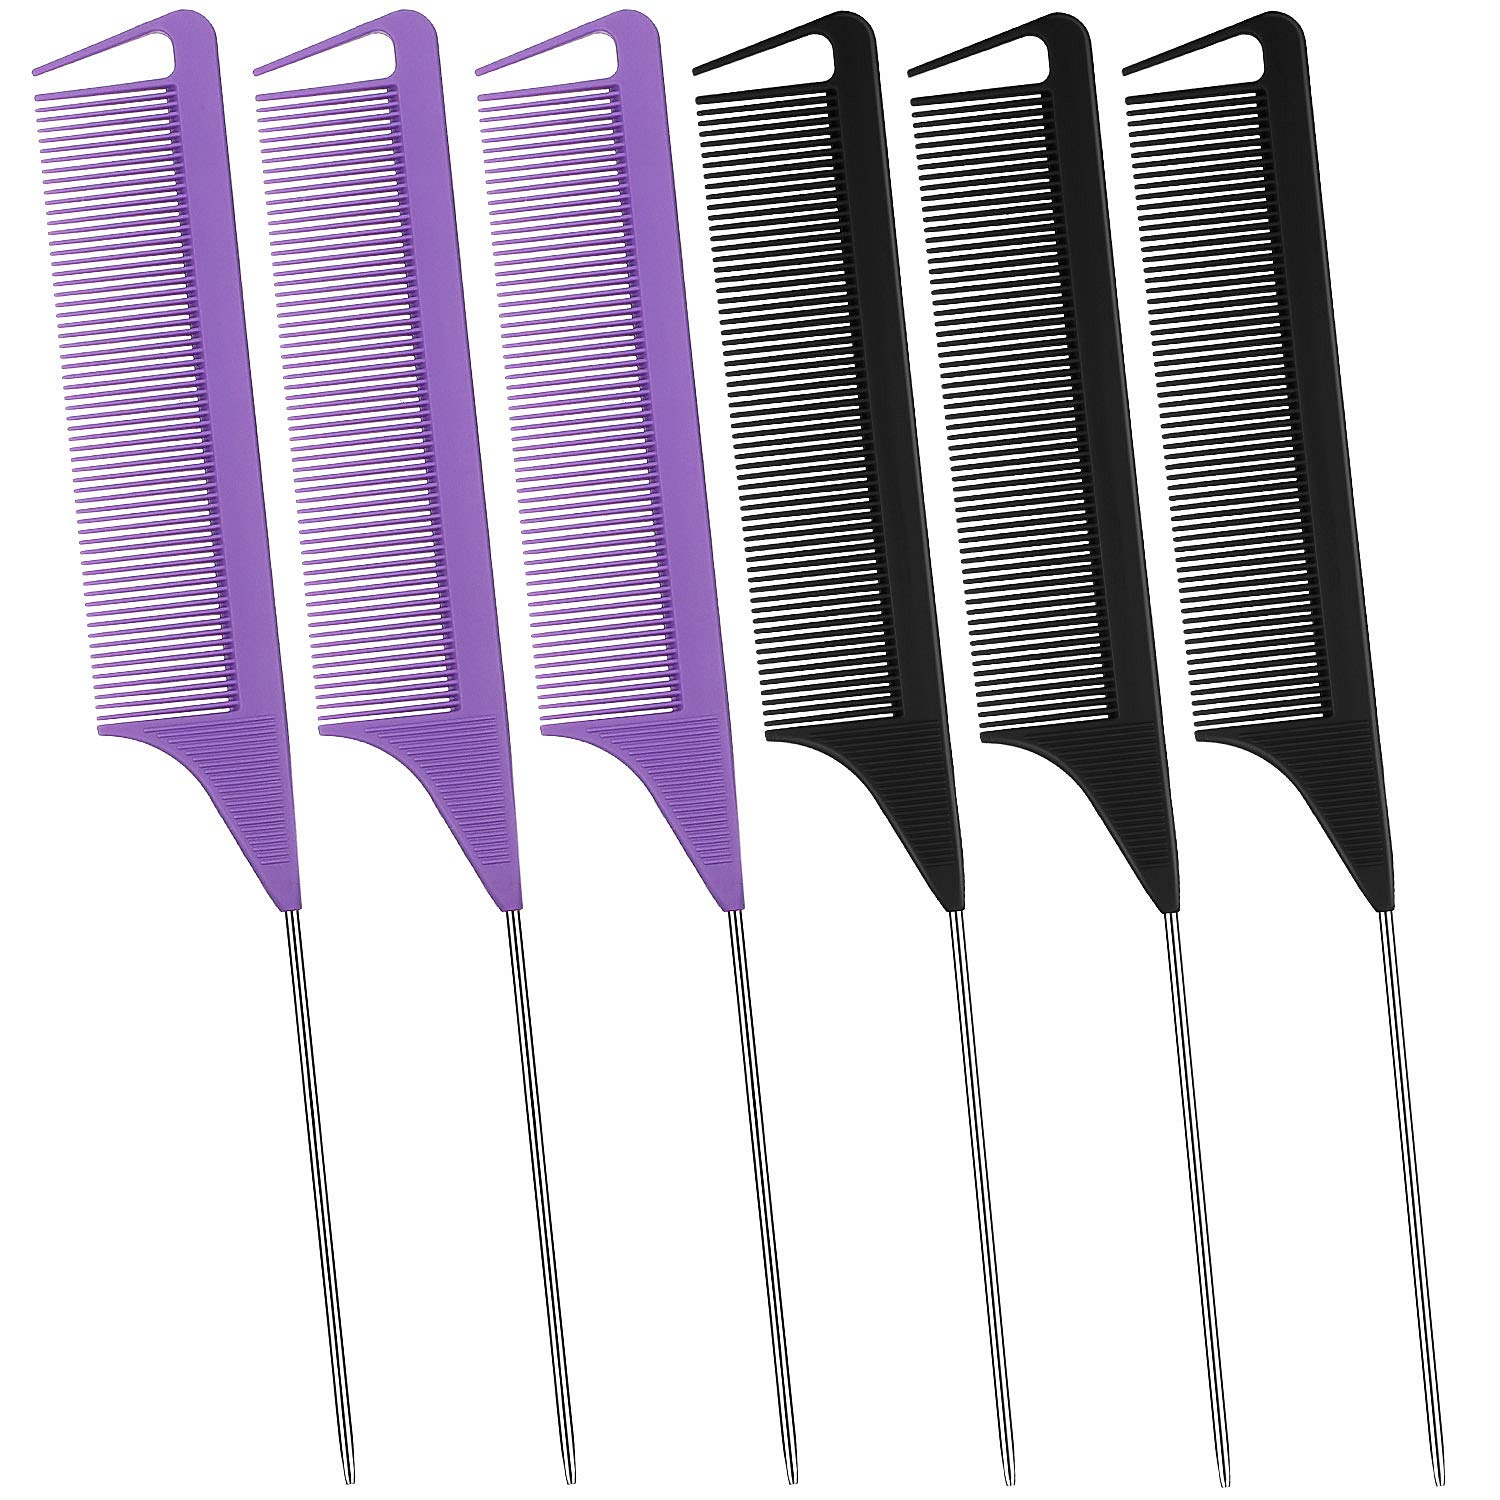 6 Pieces Comb Braiding Comb for Parting, Carbon Fiber Combs Anti-Static  Heat Resistant Tail Comb Styling Comb with Stainless Steel Handle for Hair